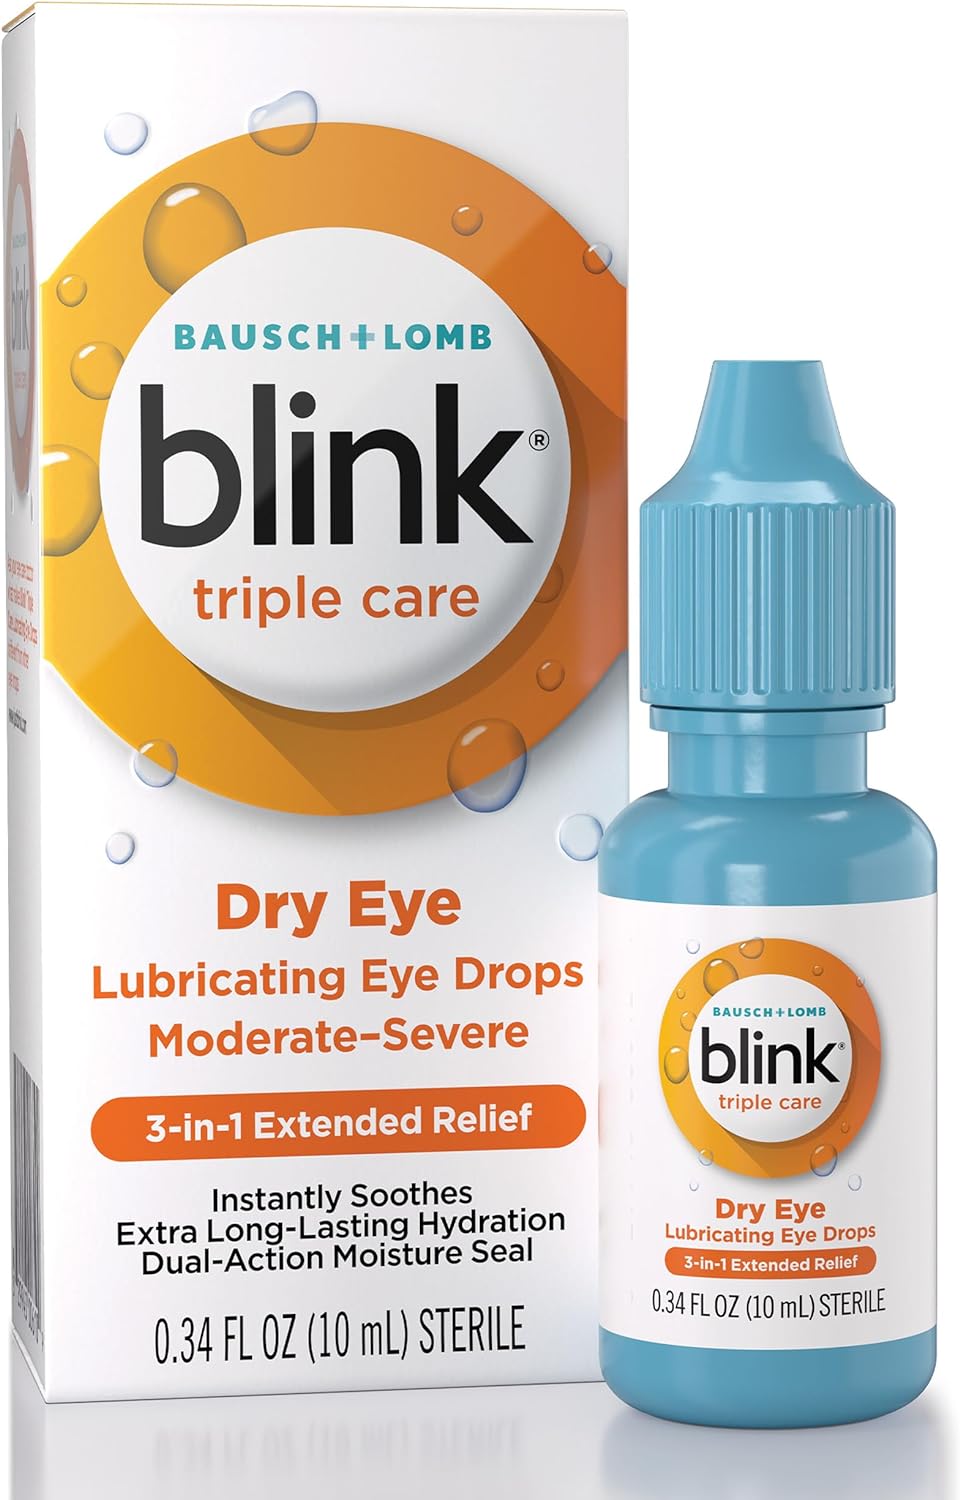 I get blurry vision when using computer due to dry eye. (When you use a computer, you tend to blink less and get dry eye which leads to blurry vision.) I tested several different eye drops and Blink Orange is the one that really works. Other dry eye drops tend to provide some relief but don't last more than a few minutes and don't do anything to stop blurry vision. I tested Blink (blue, green, and orange), Siccaforte Gel, Systane gel, Refresh Relieva, and Rohto dry eye. See picture. Blink Orange